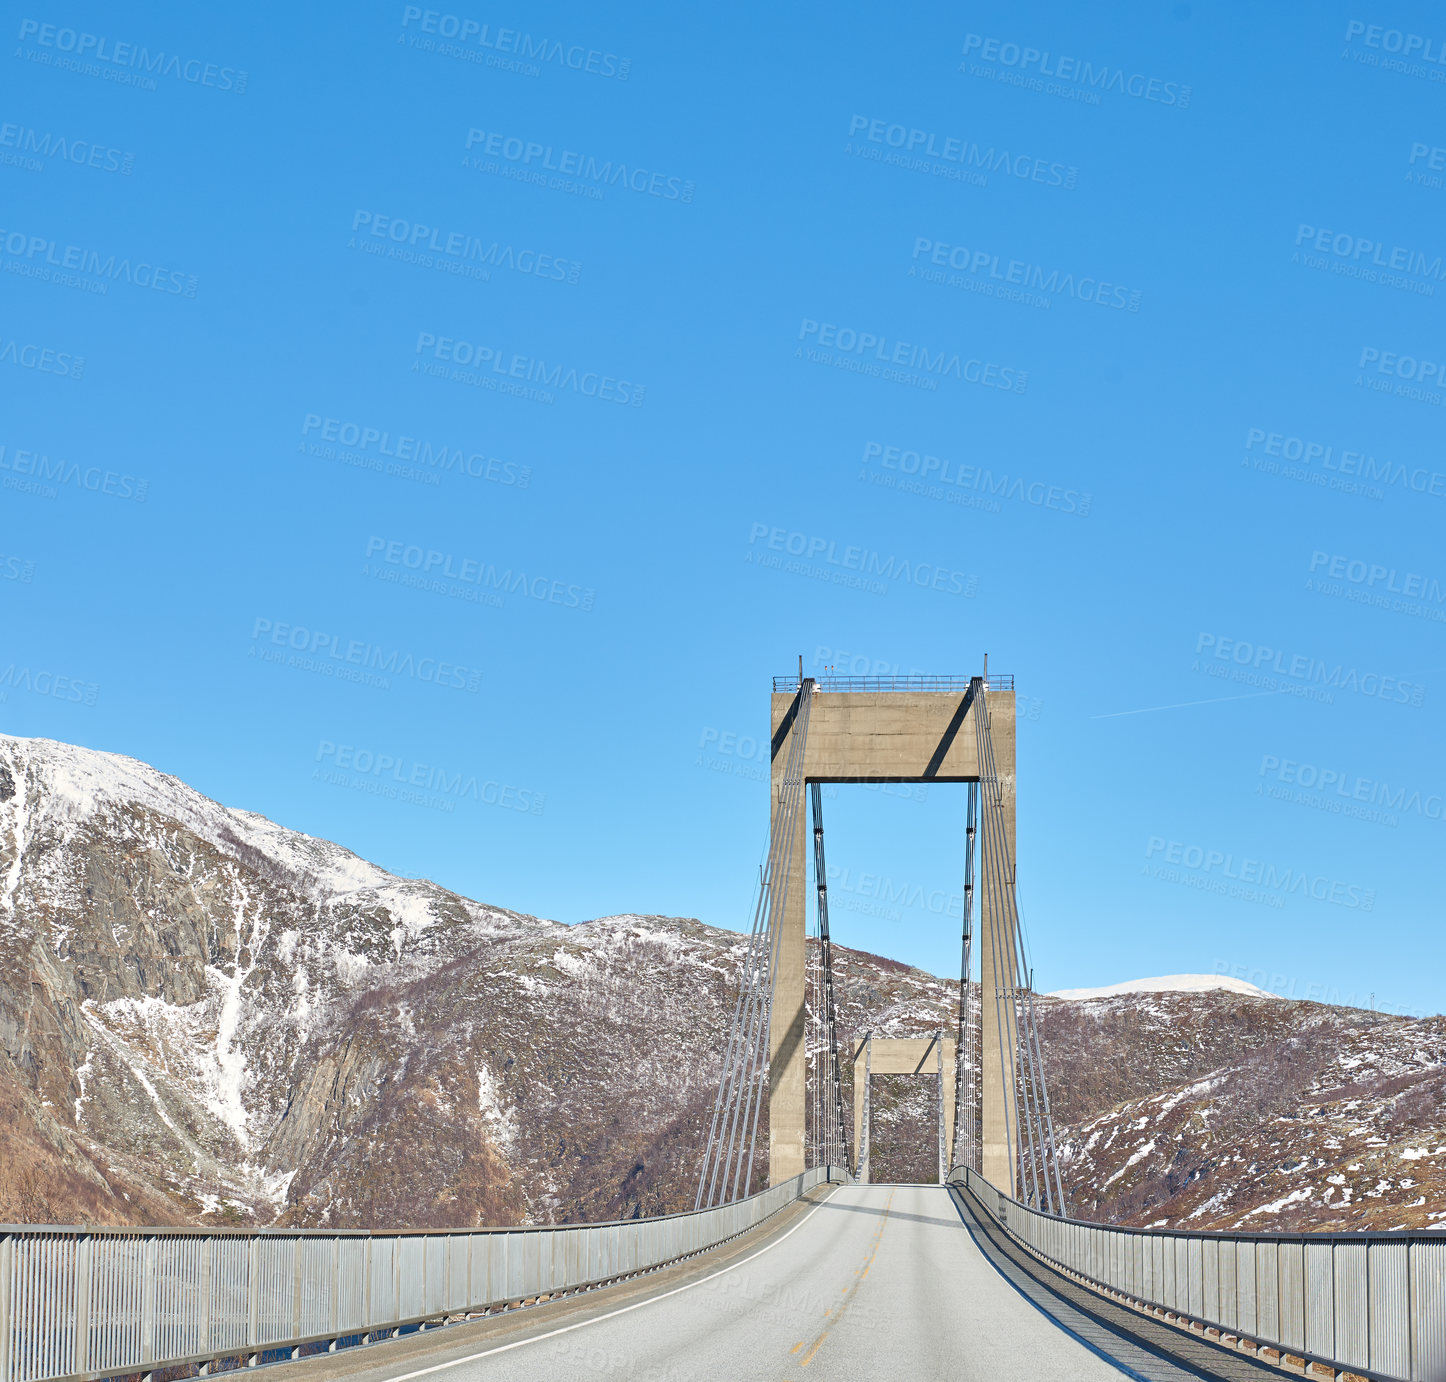 Buy stock photo Empty road in the mountains against a blue sky with copy space. Deserted highway crossing in the cold snowy and grey hills around Bodo in Norway. Polar landscape of old bridge over a ravine or river